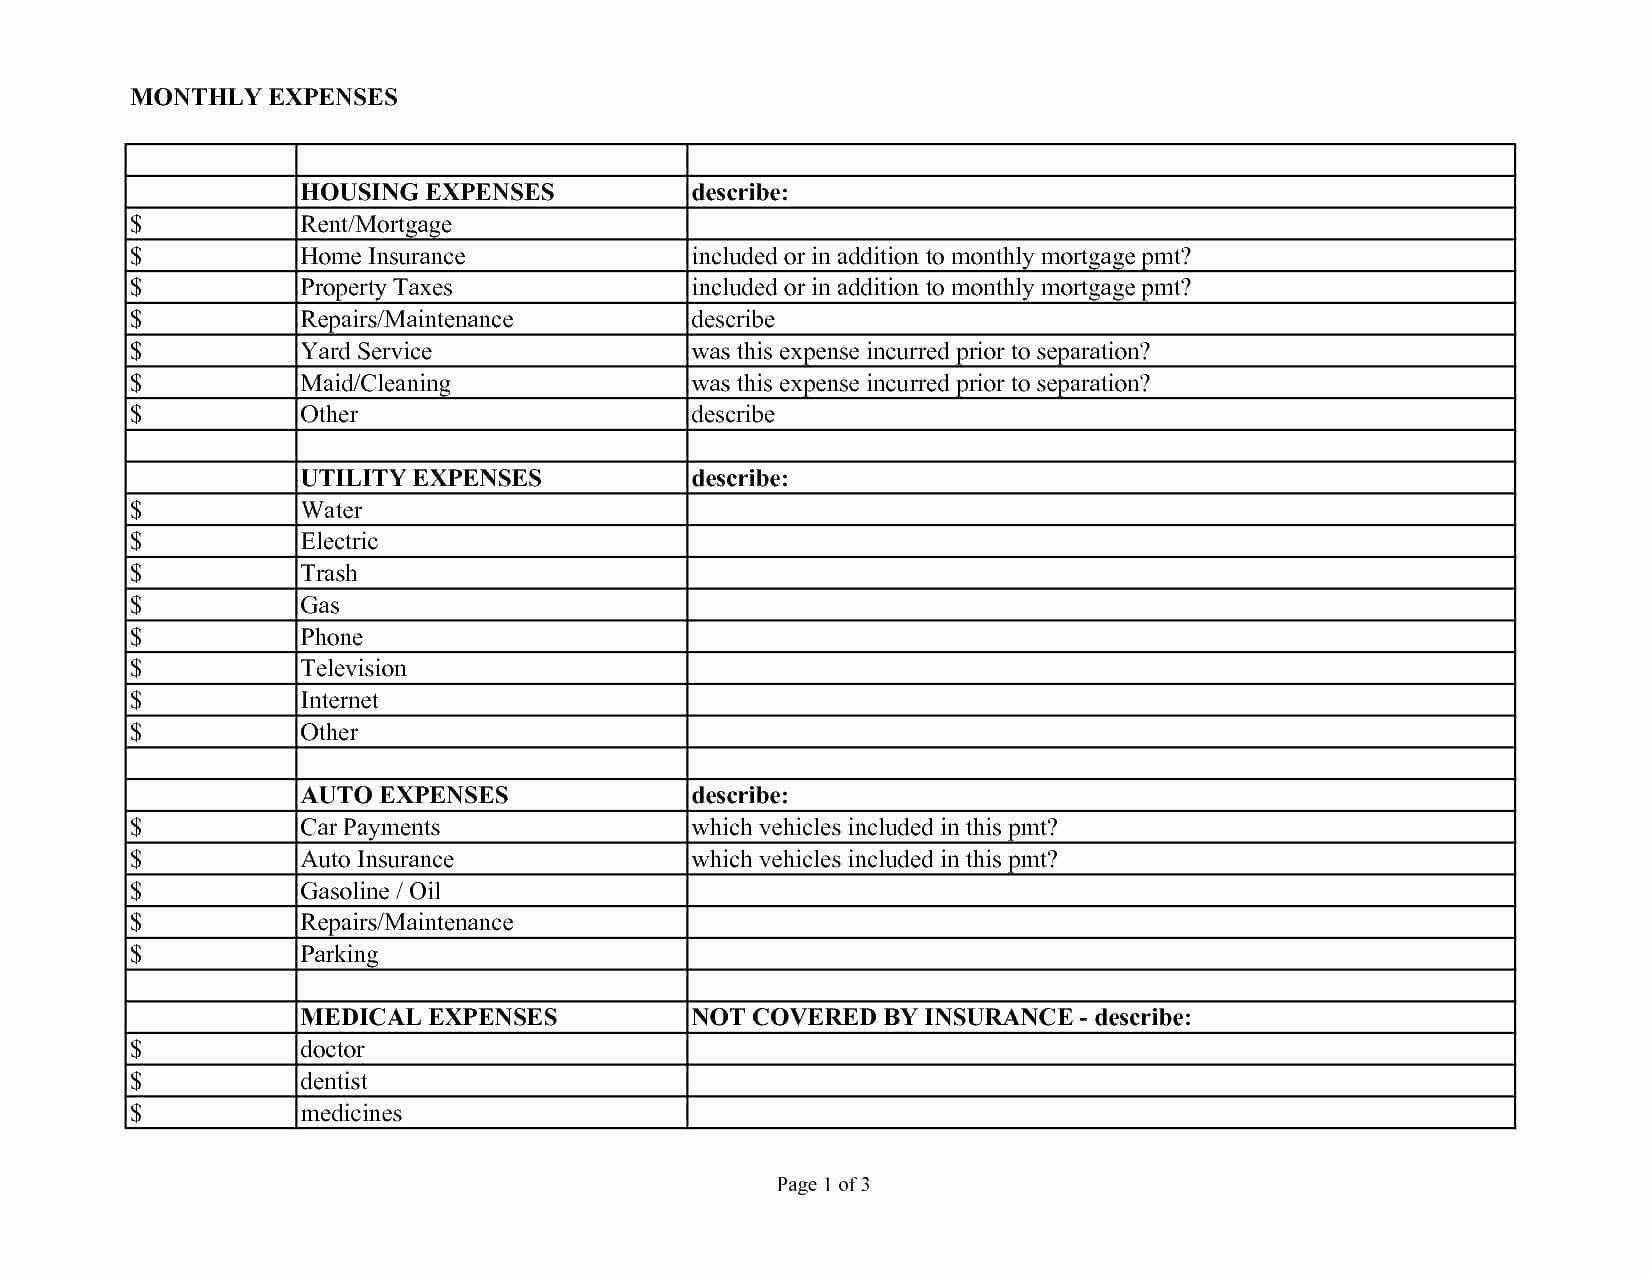 50 Fresh Truck Driver Expense Sheet DOCUMENTS IDEAS Document Schedule C Car And Expenses